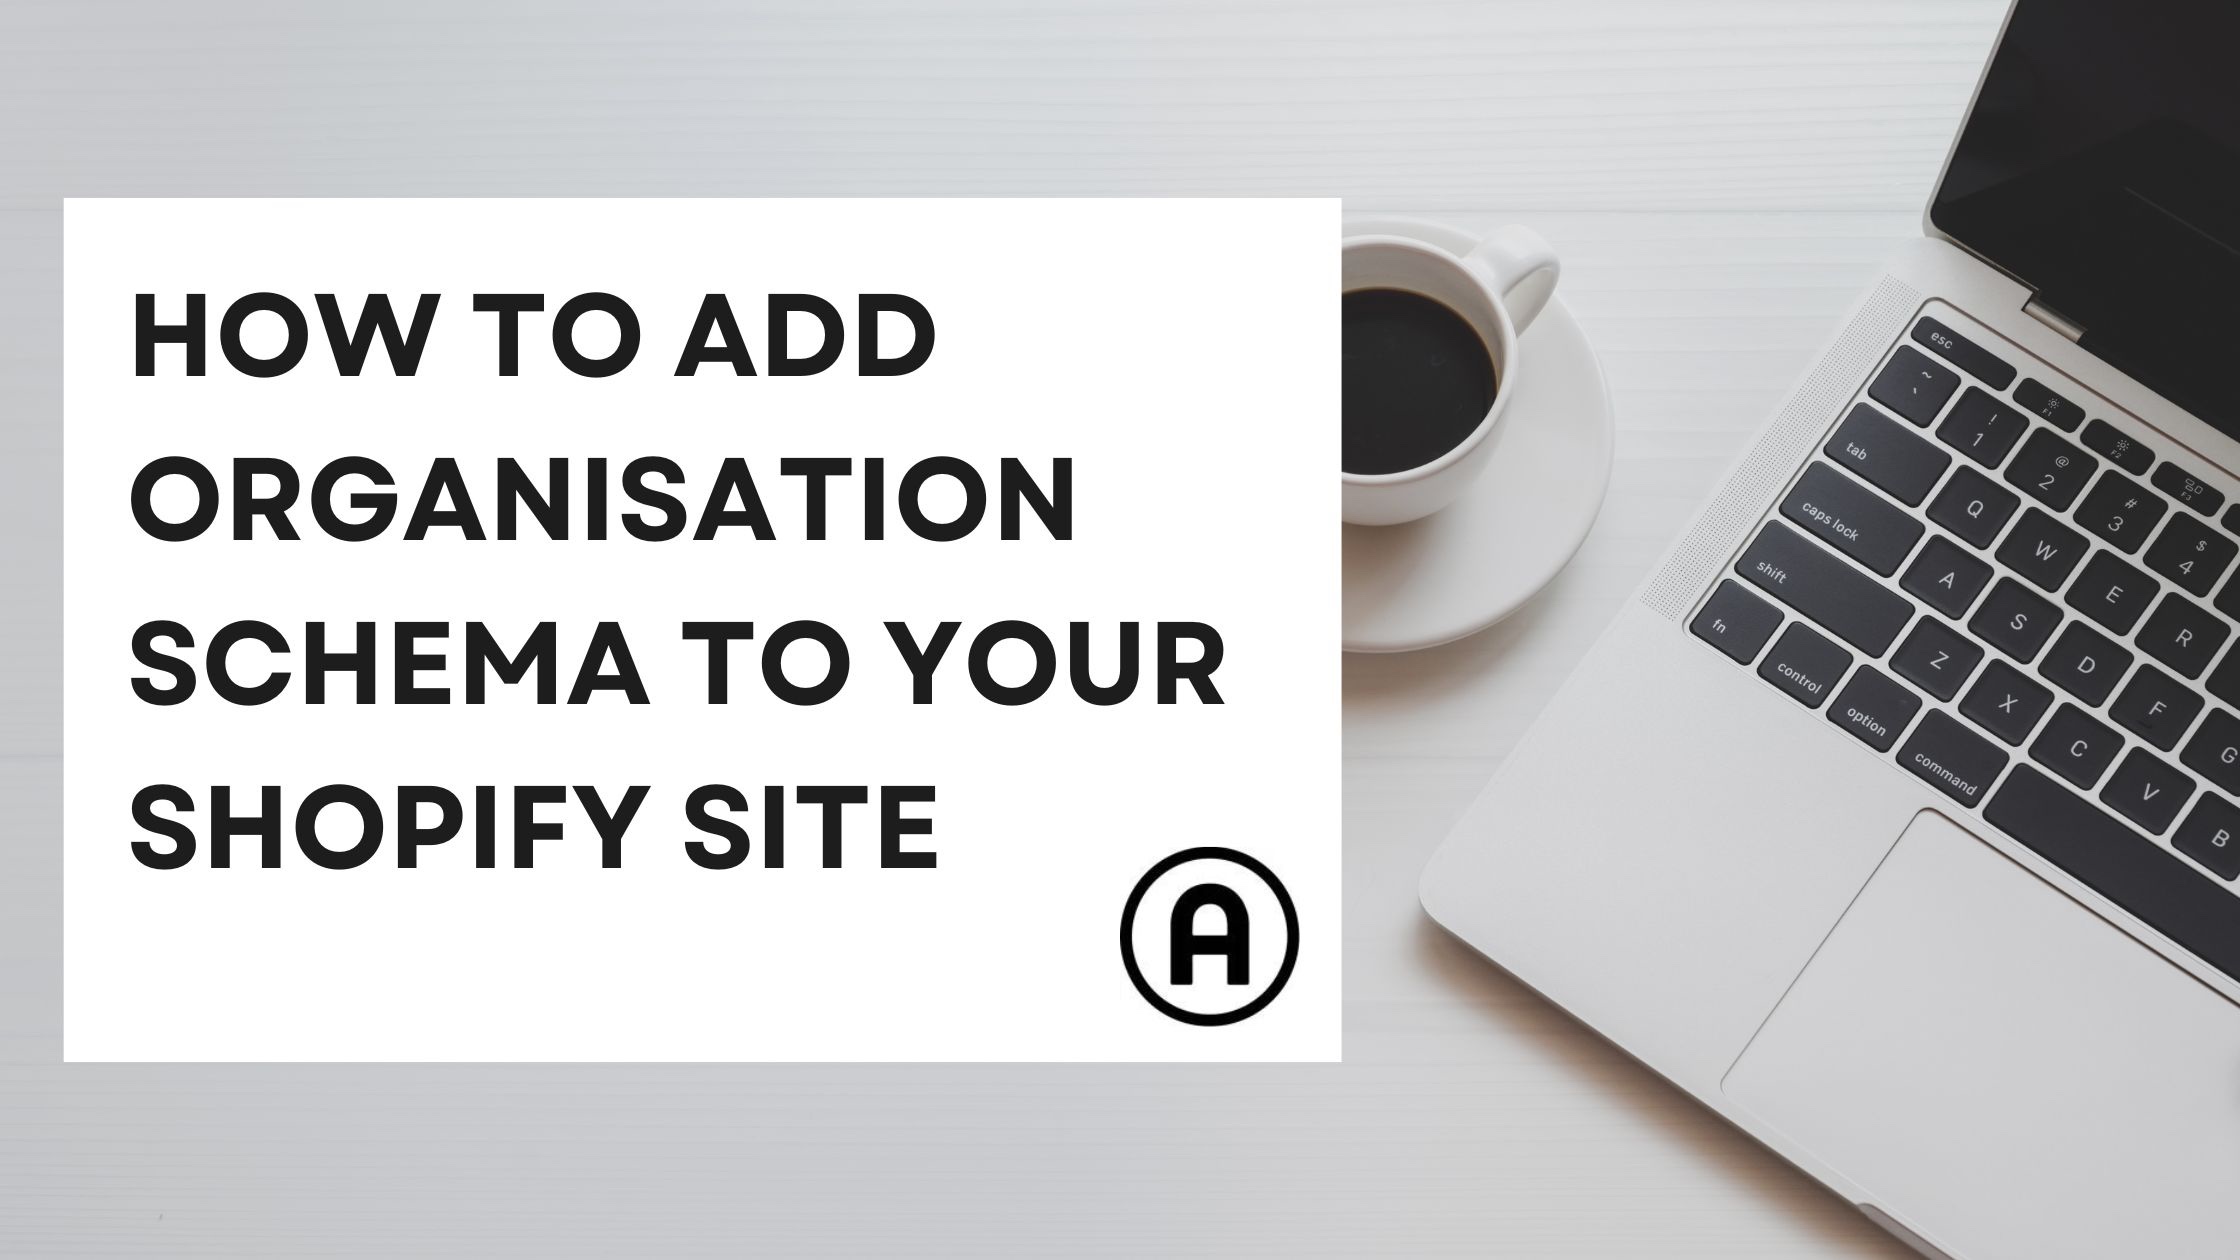 How to Add Organisation Schema to your Shopify Site